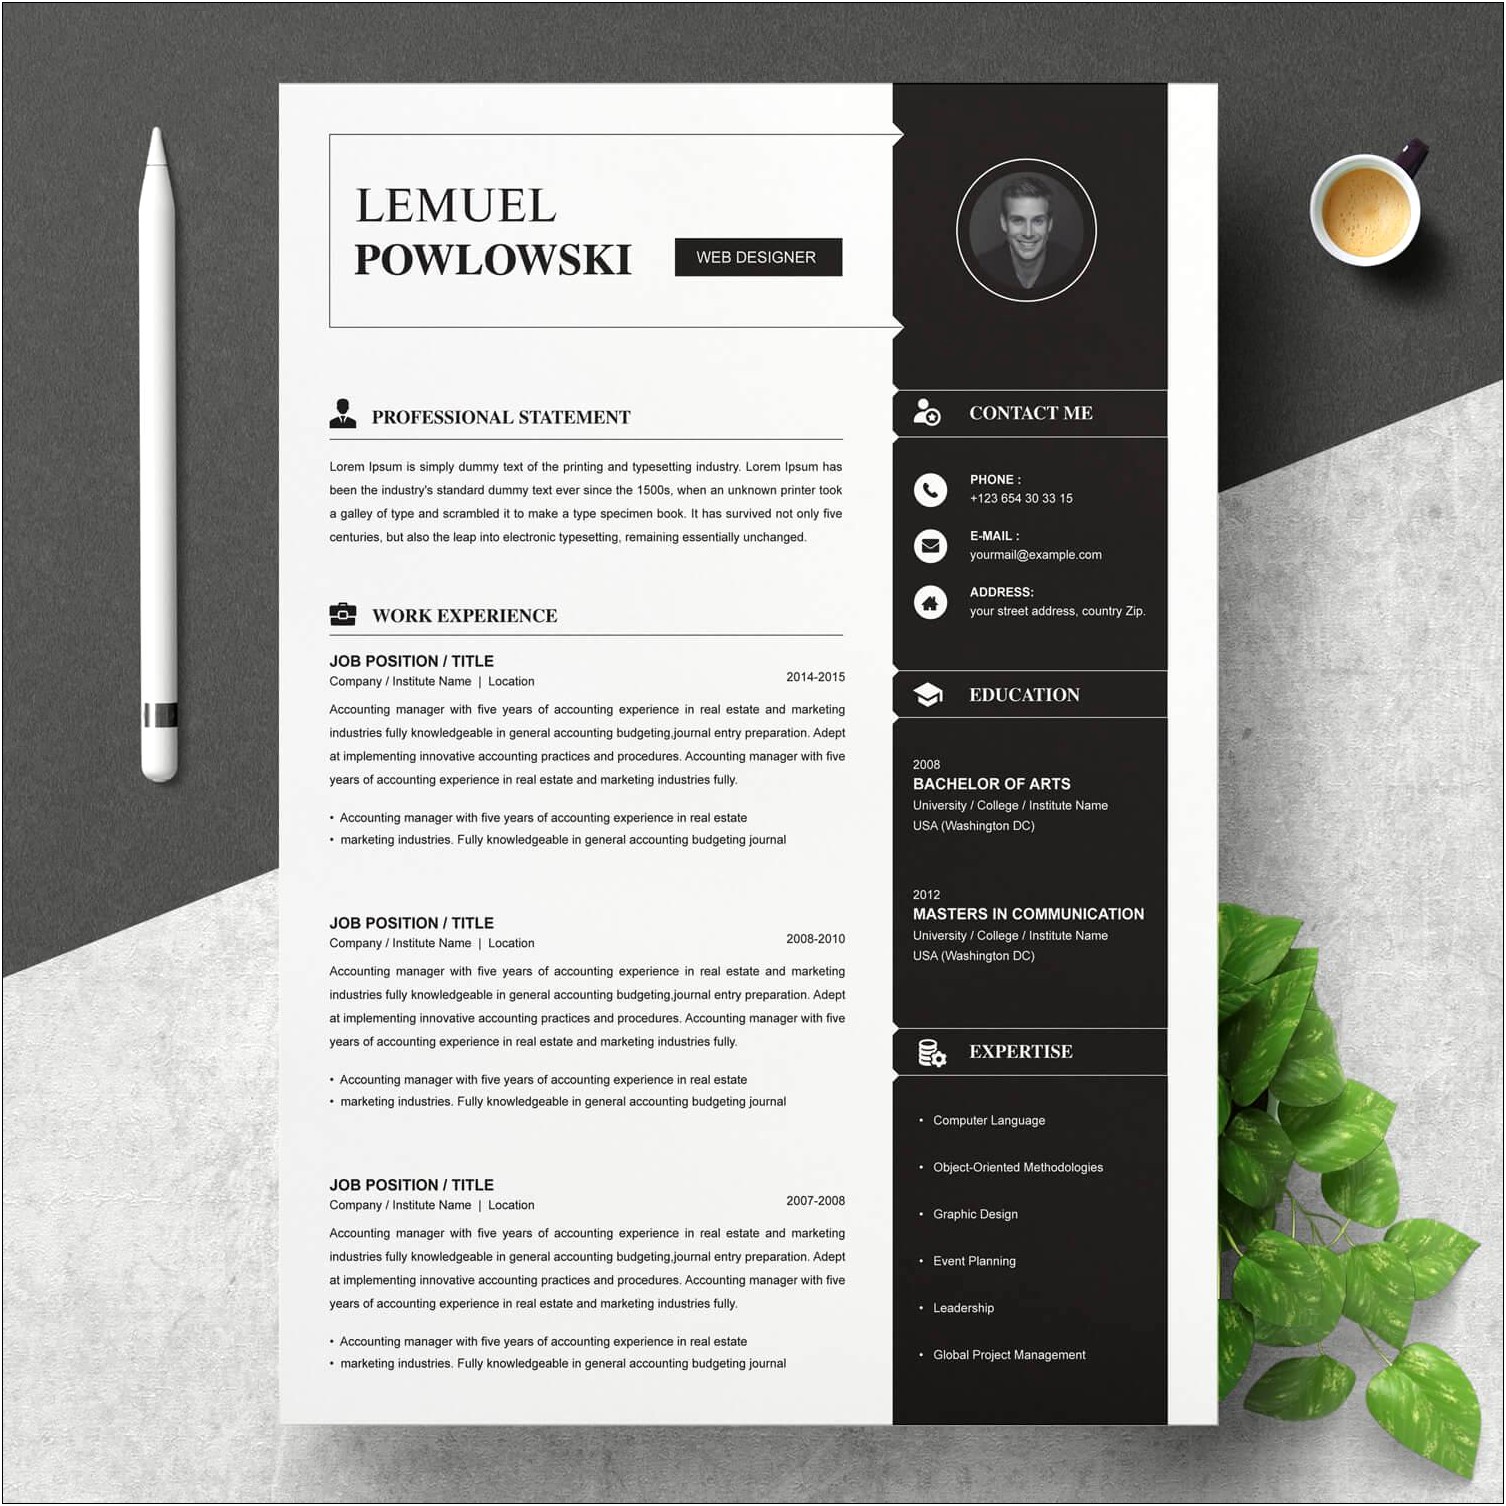 Examples Of Resumes For Graphic Designers